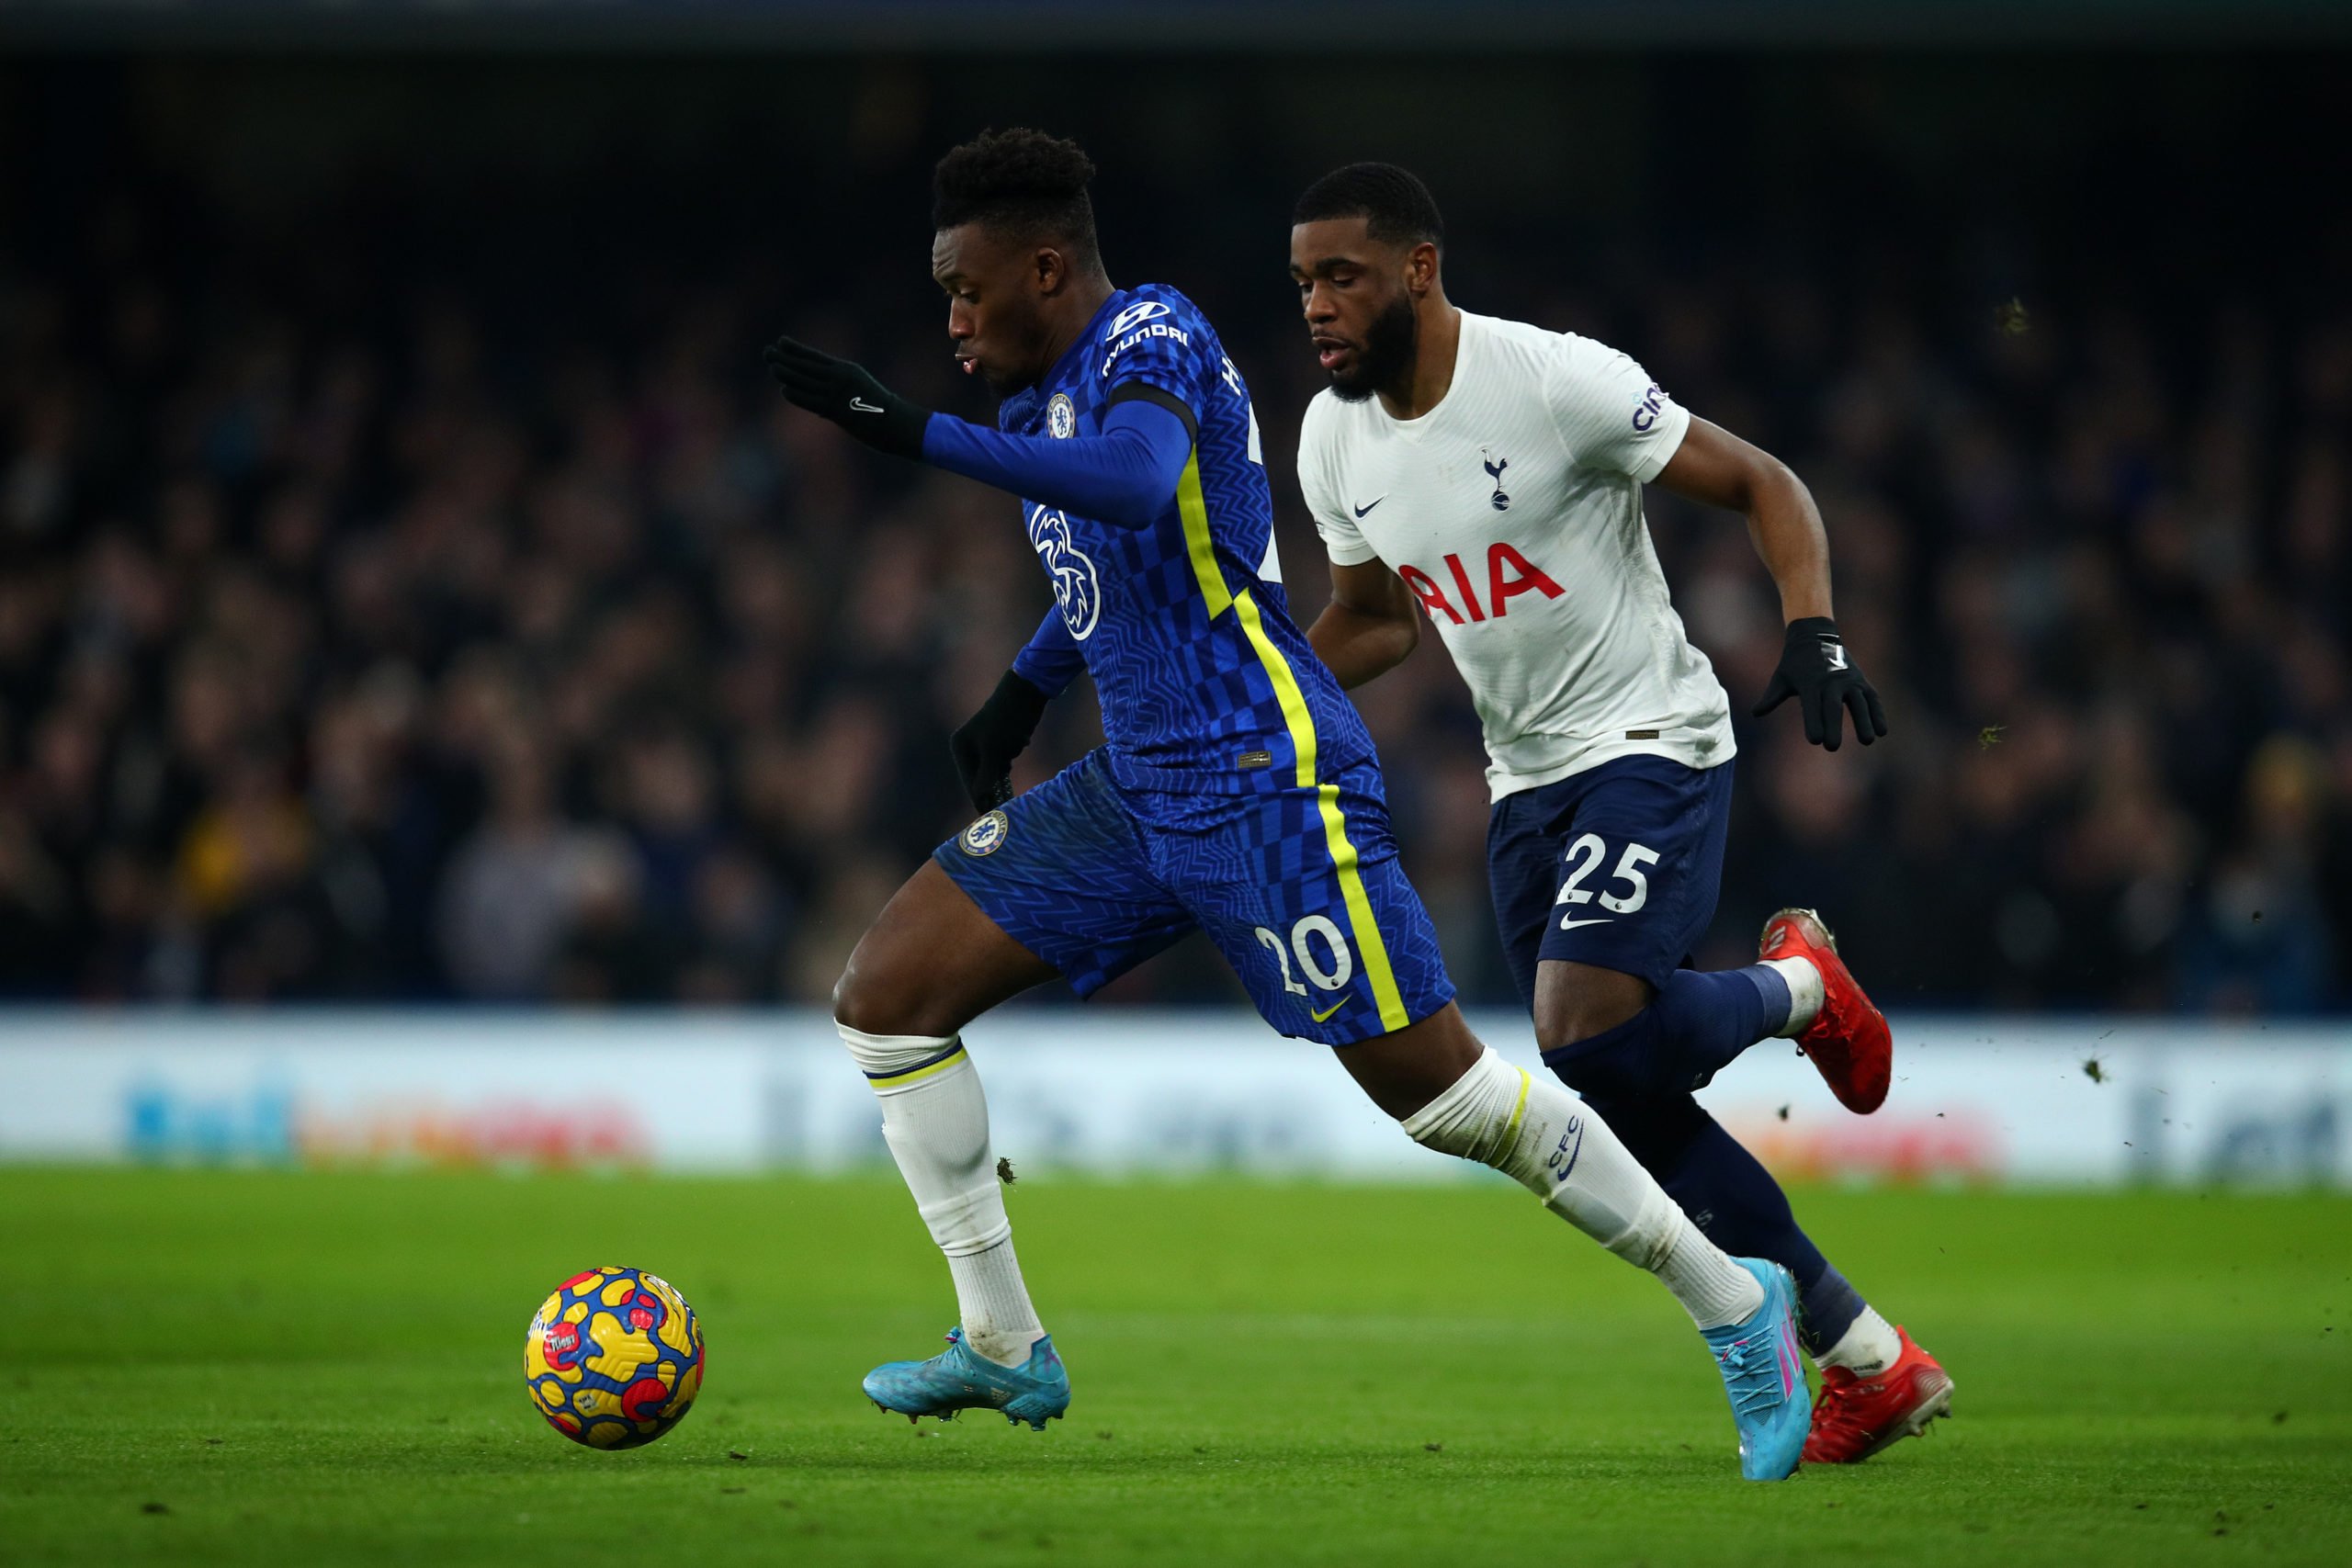 'Hopefully get him booked': Hudson-Odoi says he was trying to get one Tottenham player sent off yesterday